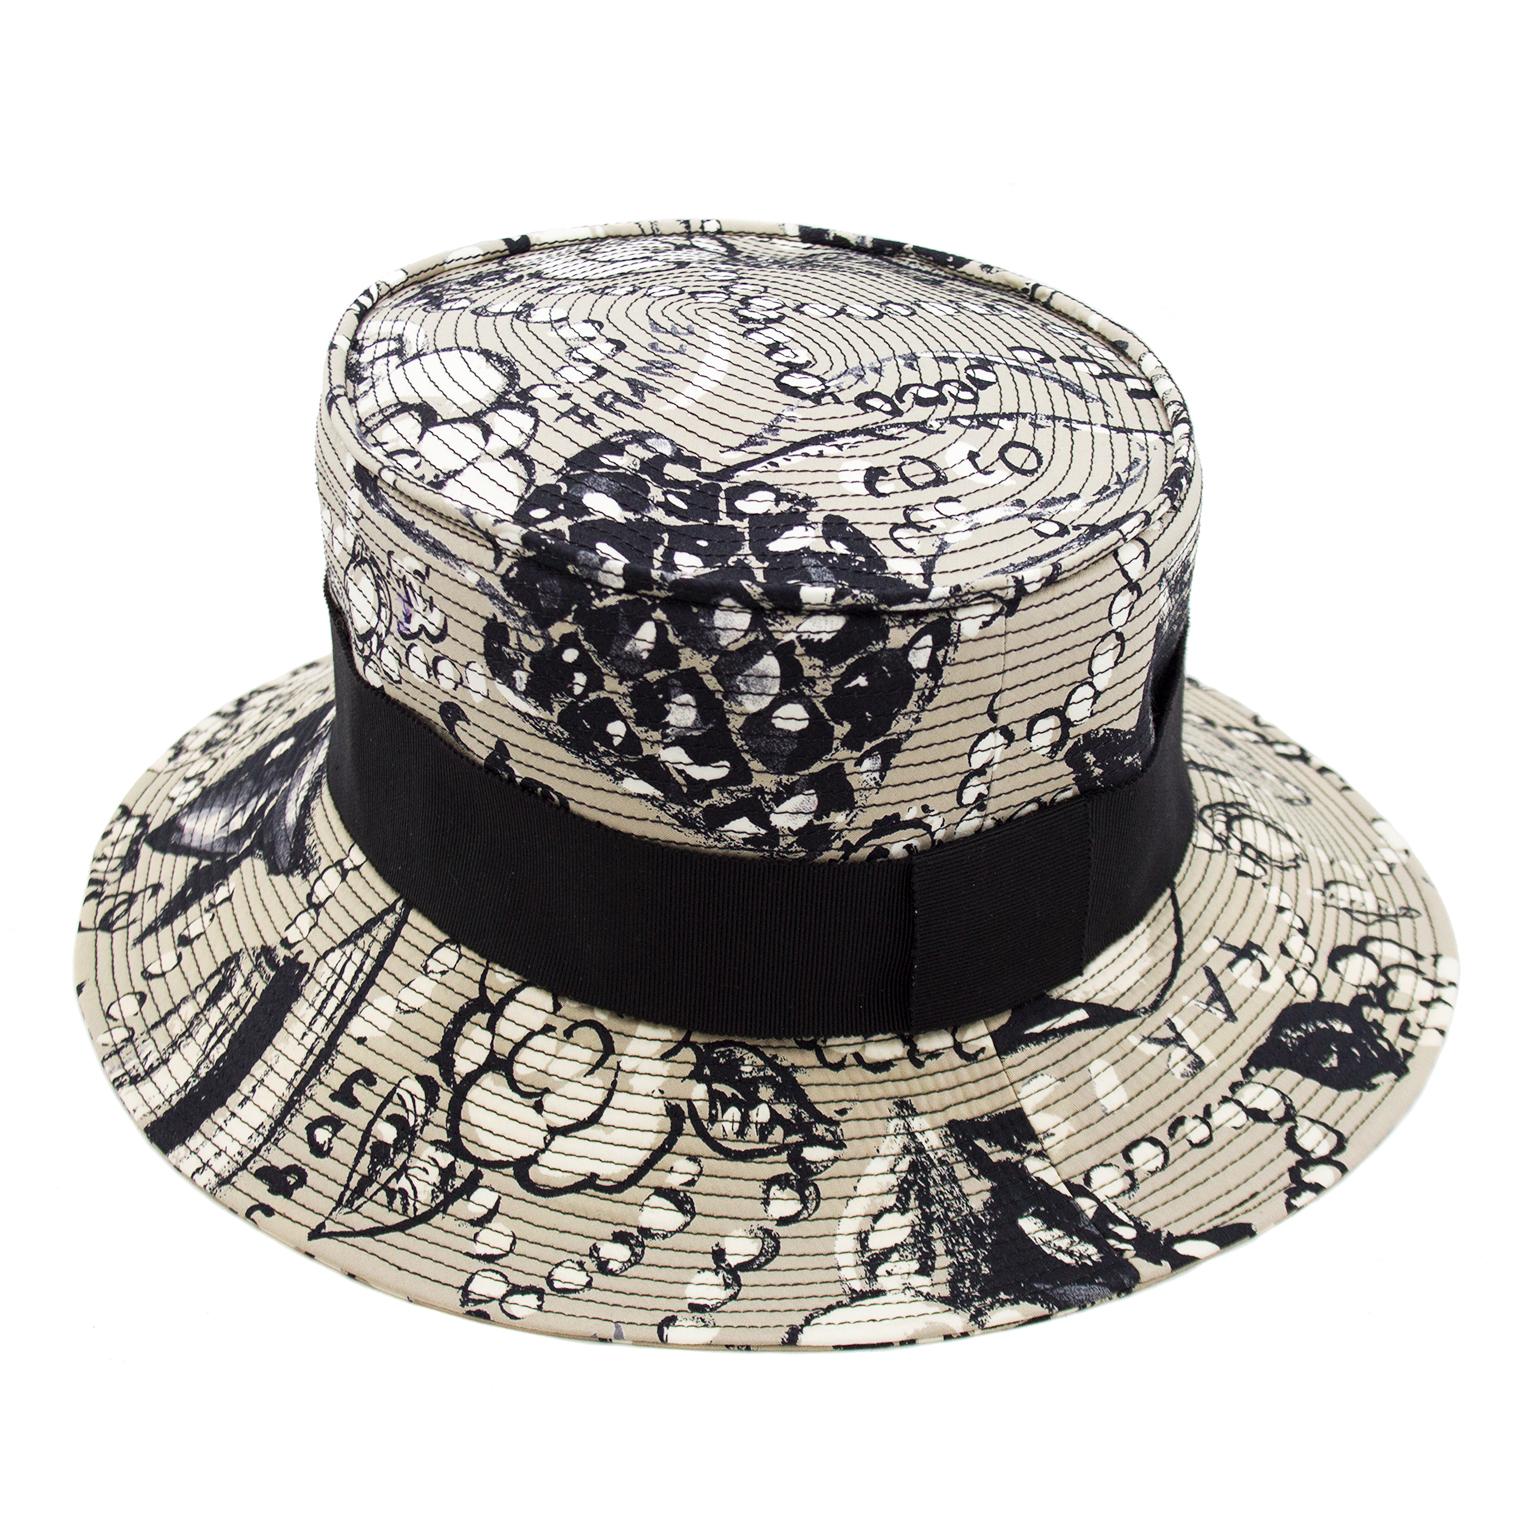 Taupe, white and black cotton flat top bucket hat with brim. Black grosgrain ribbon ties in with the hand drawn pearl, camelia and 255 quilted bag fabric. Fits quite small, 20 internal circumference. In excellent condition. Perfect for casual sun